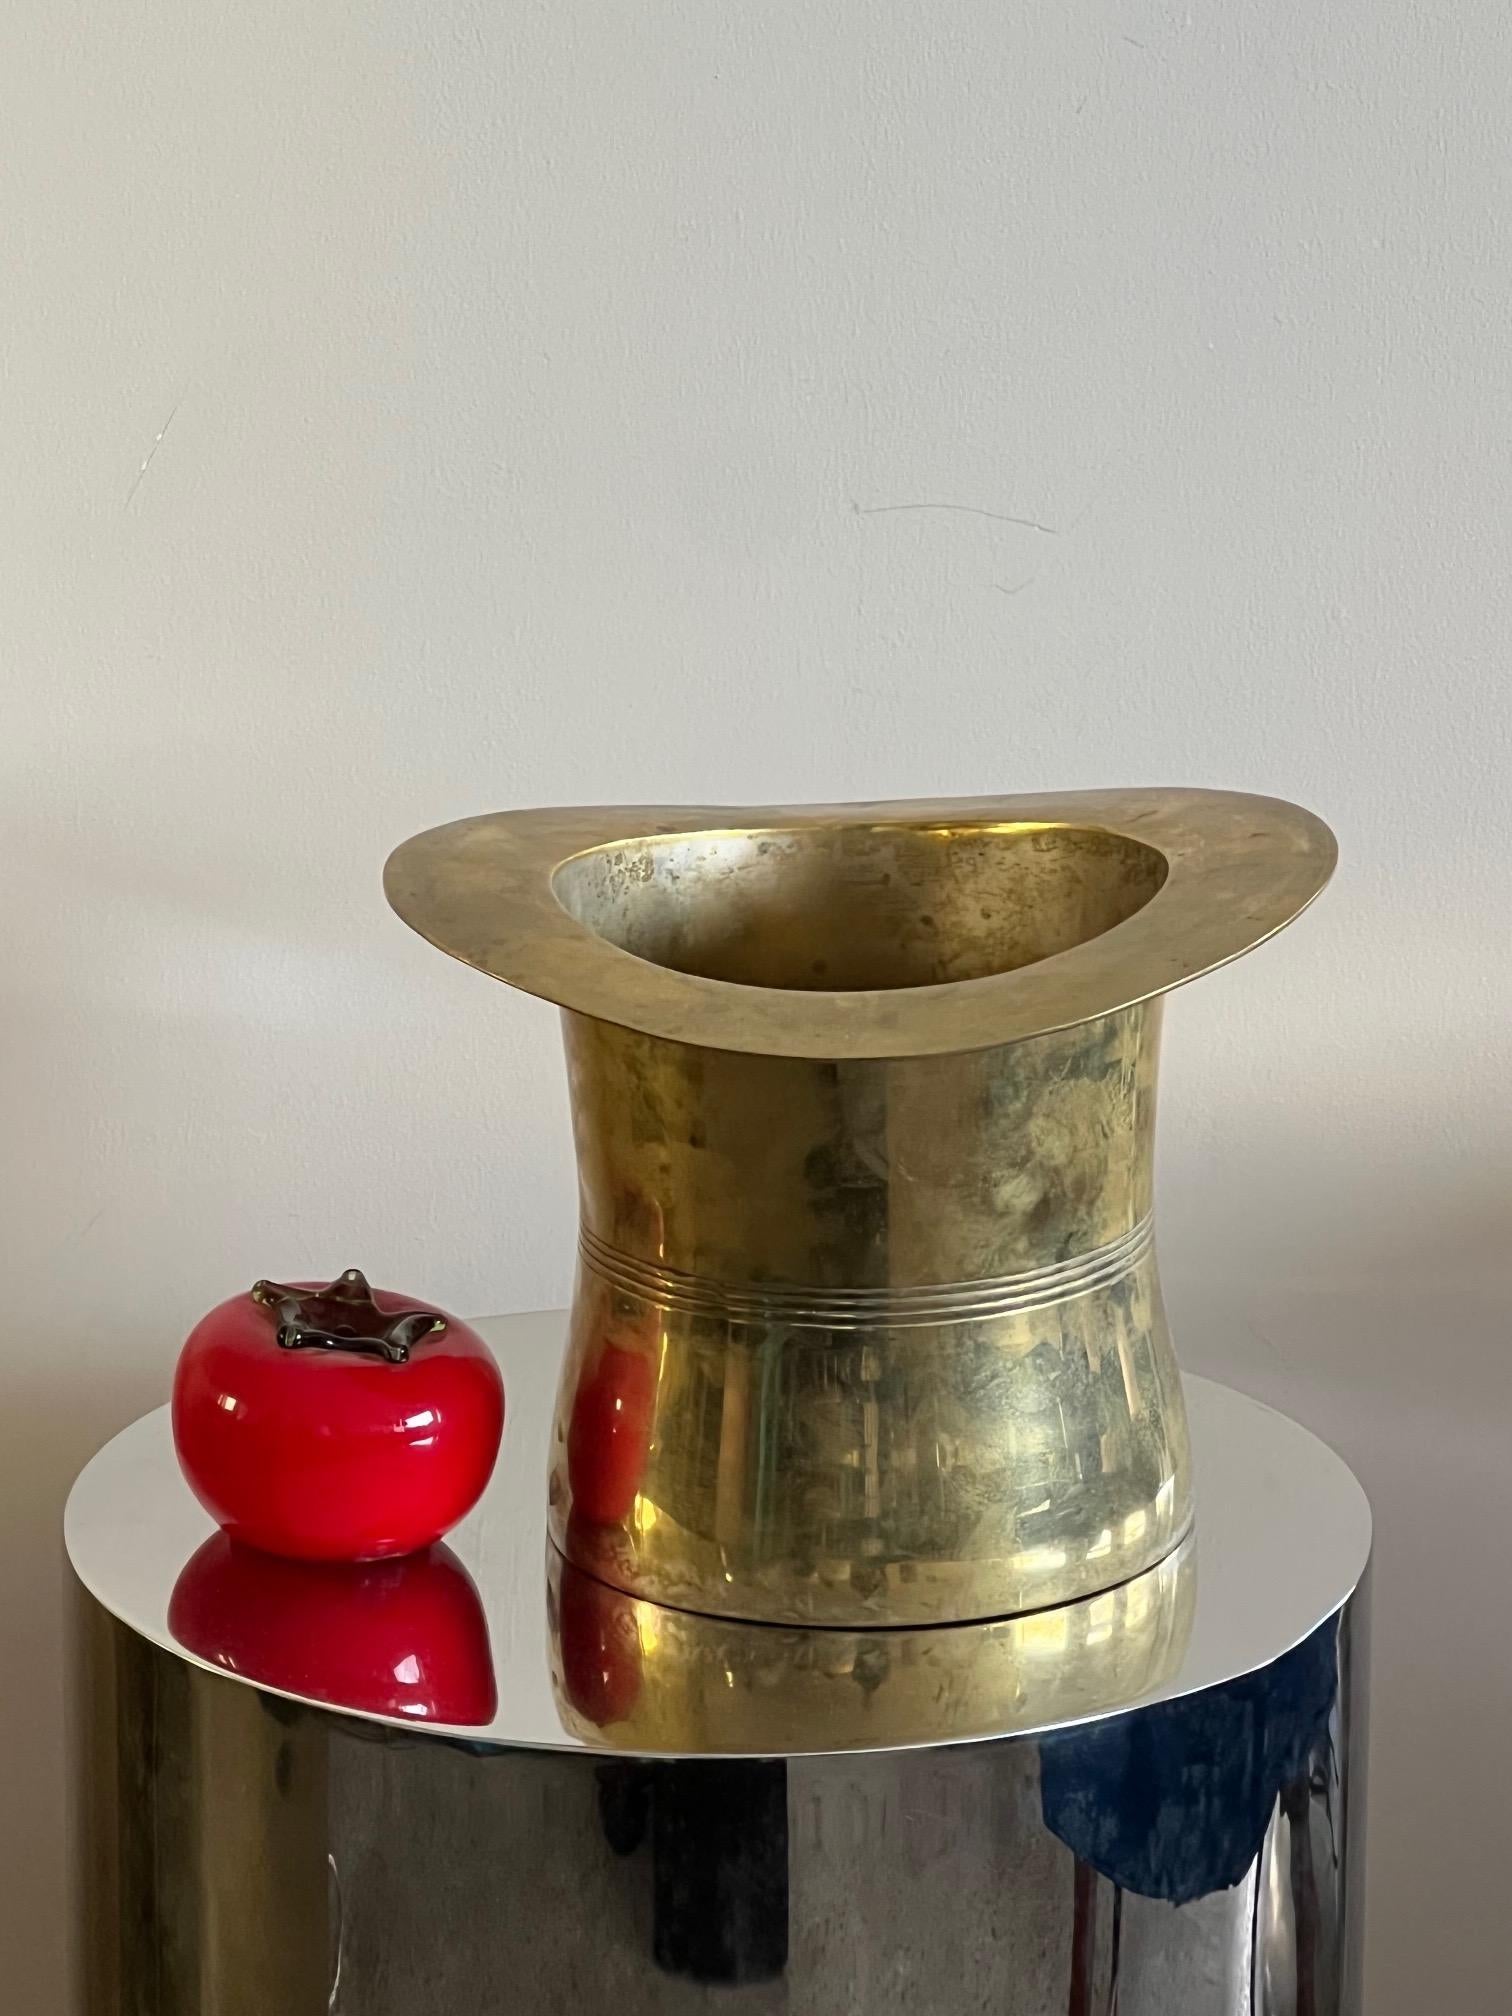 Unusual and fun, heavy brass, ice bucket shaped like a top hat.